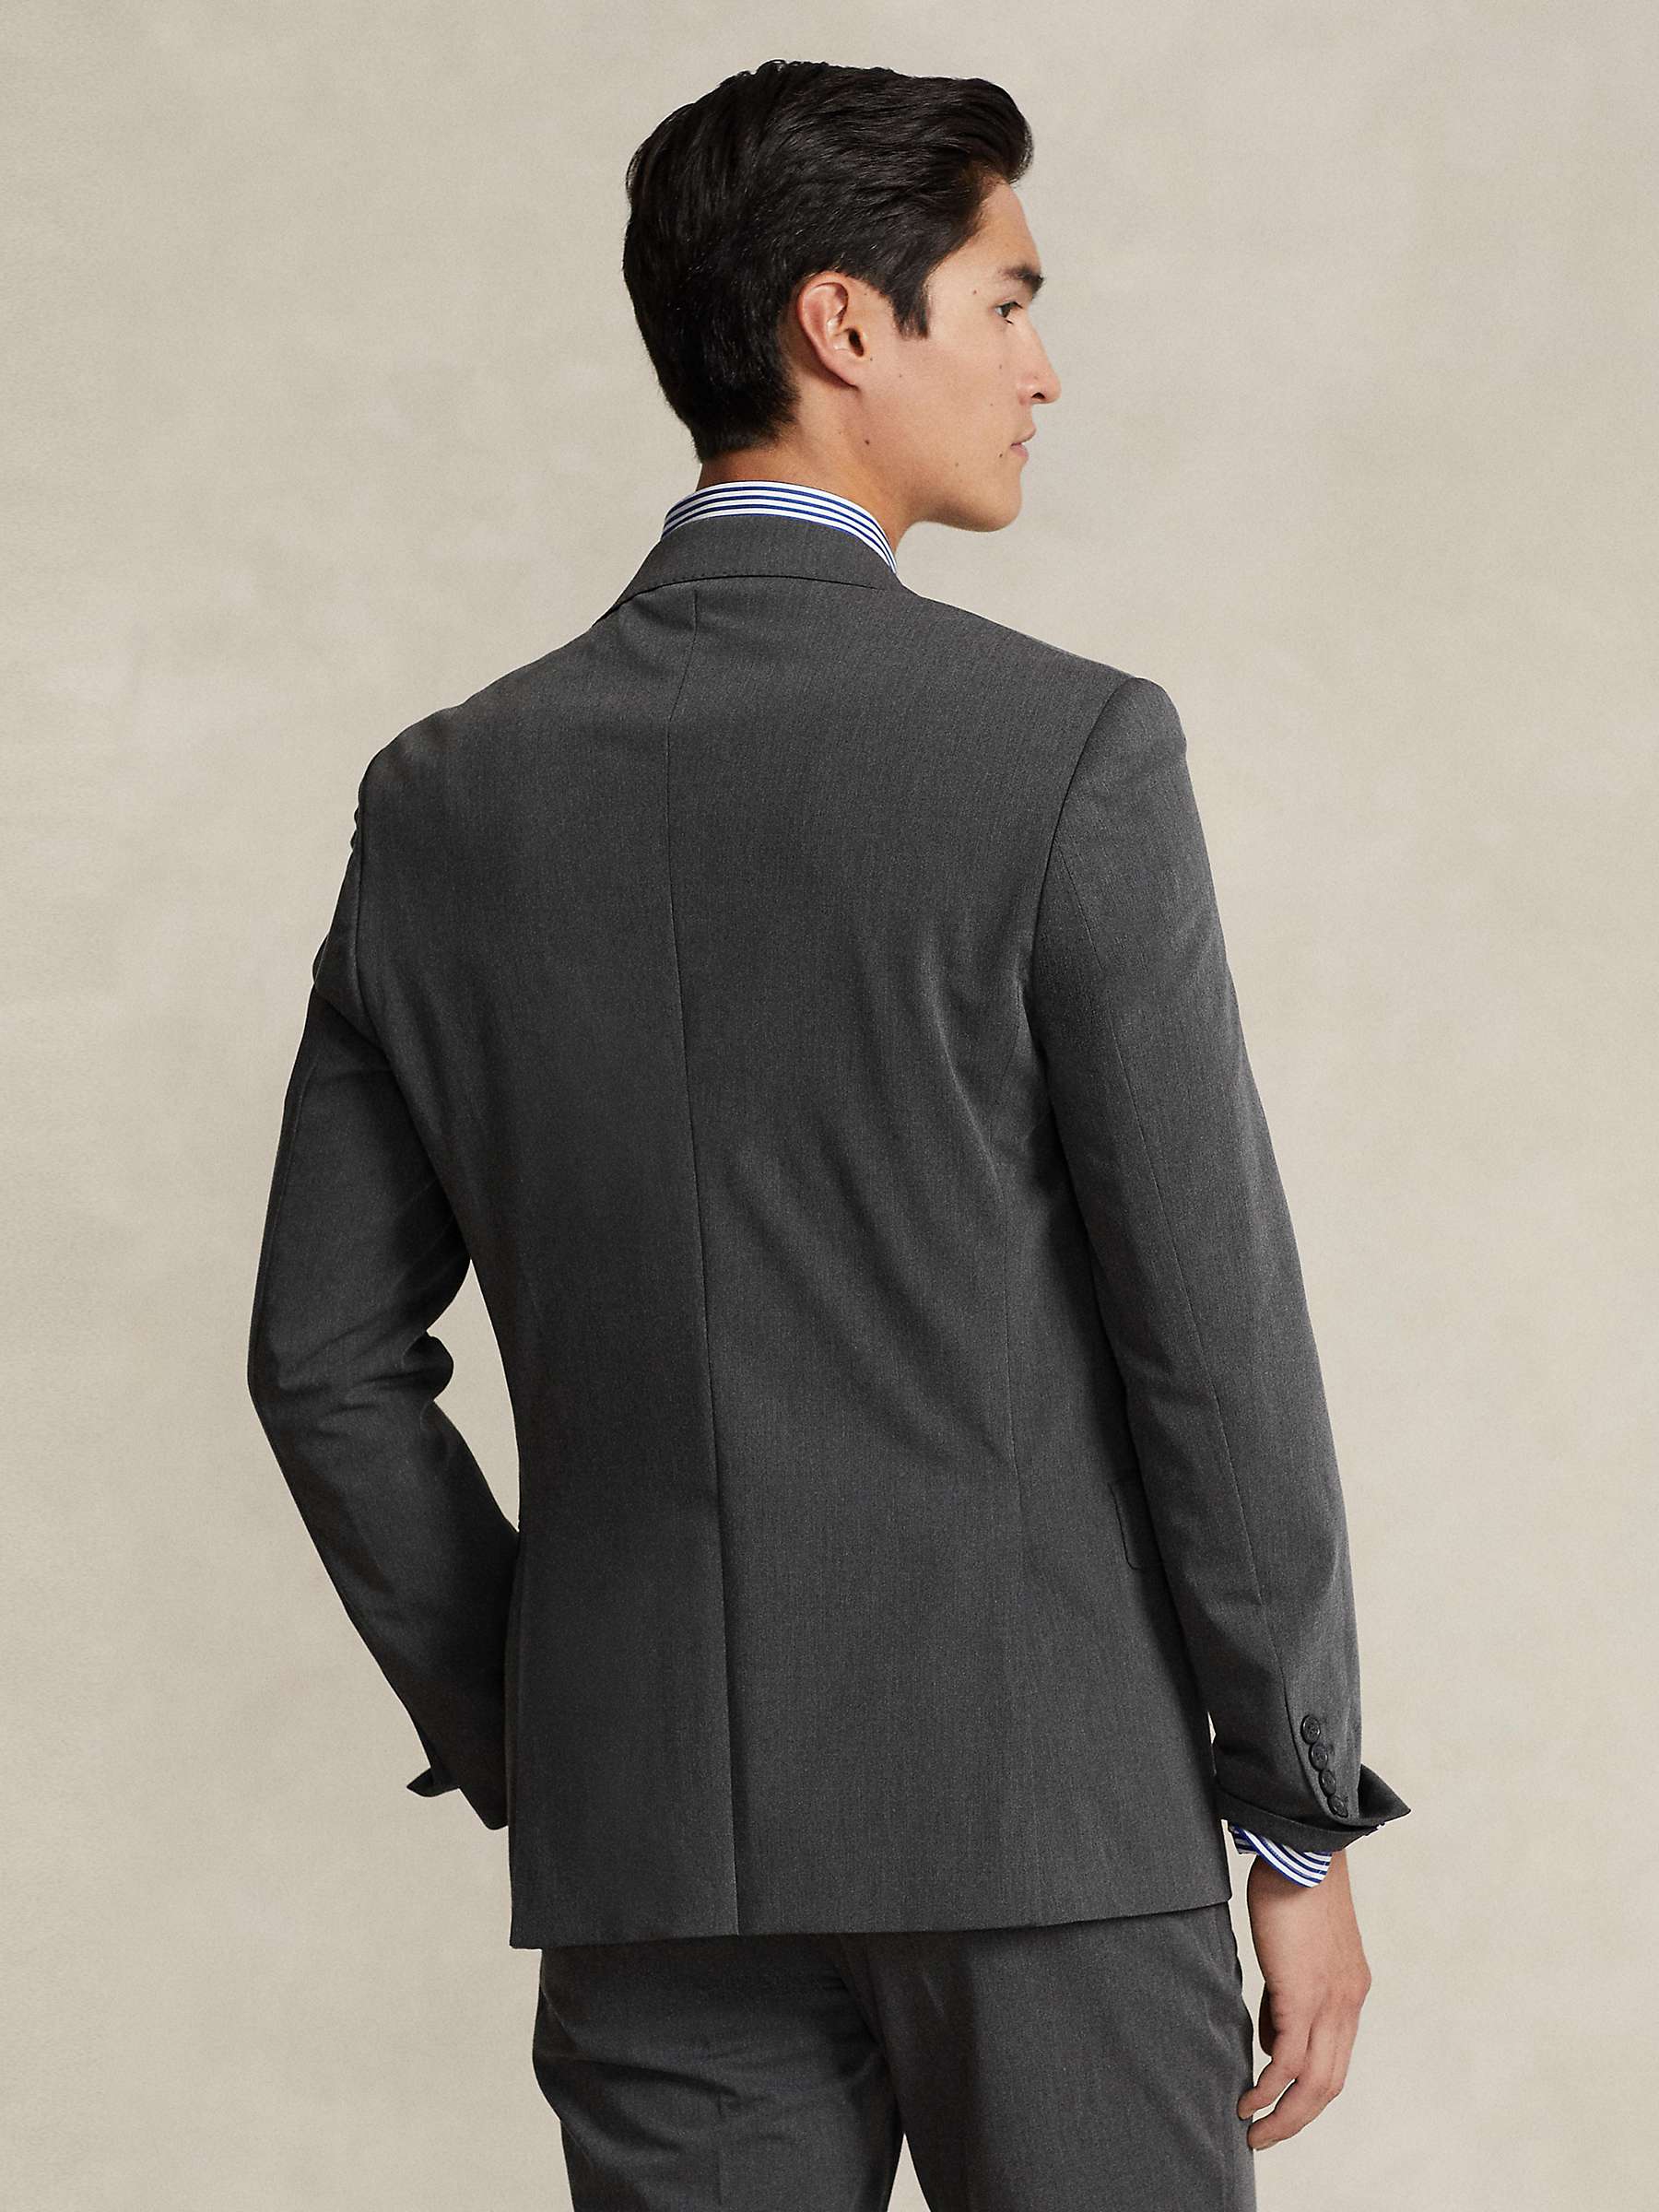 Buy Polo Ralph Lauren Modern Tailored Fit Suit Jacket Online at johnlewis.com